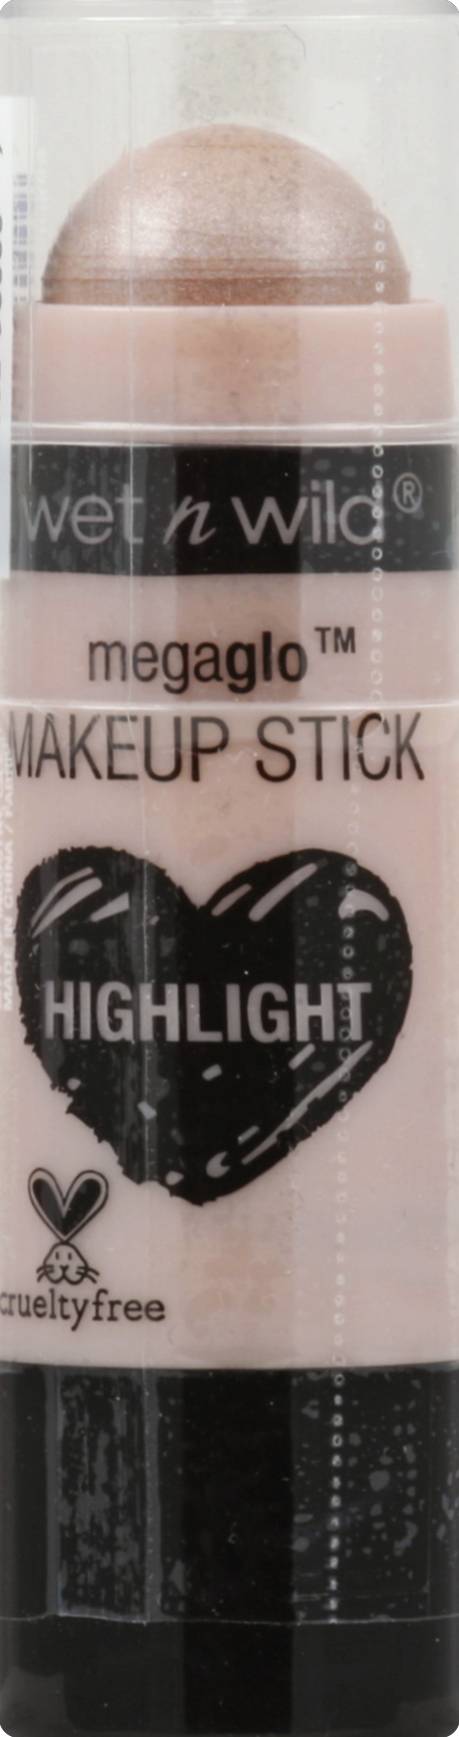 Wet N Wild Megaglo When the Nude Strikes 800 Highlight Makeup Stick